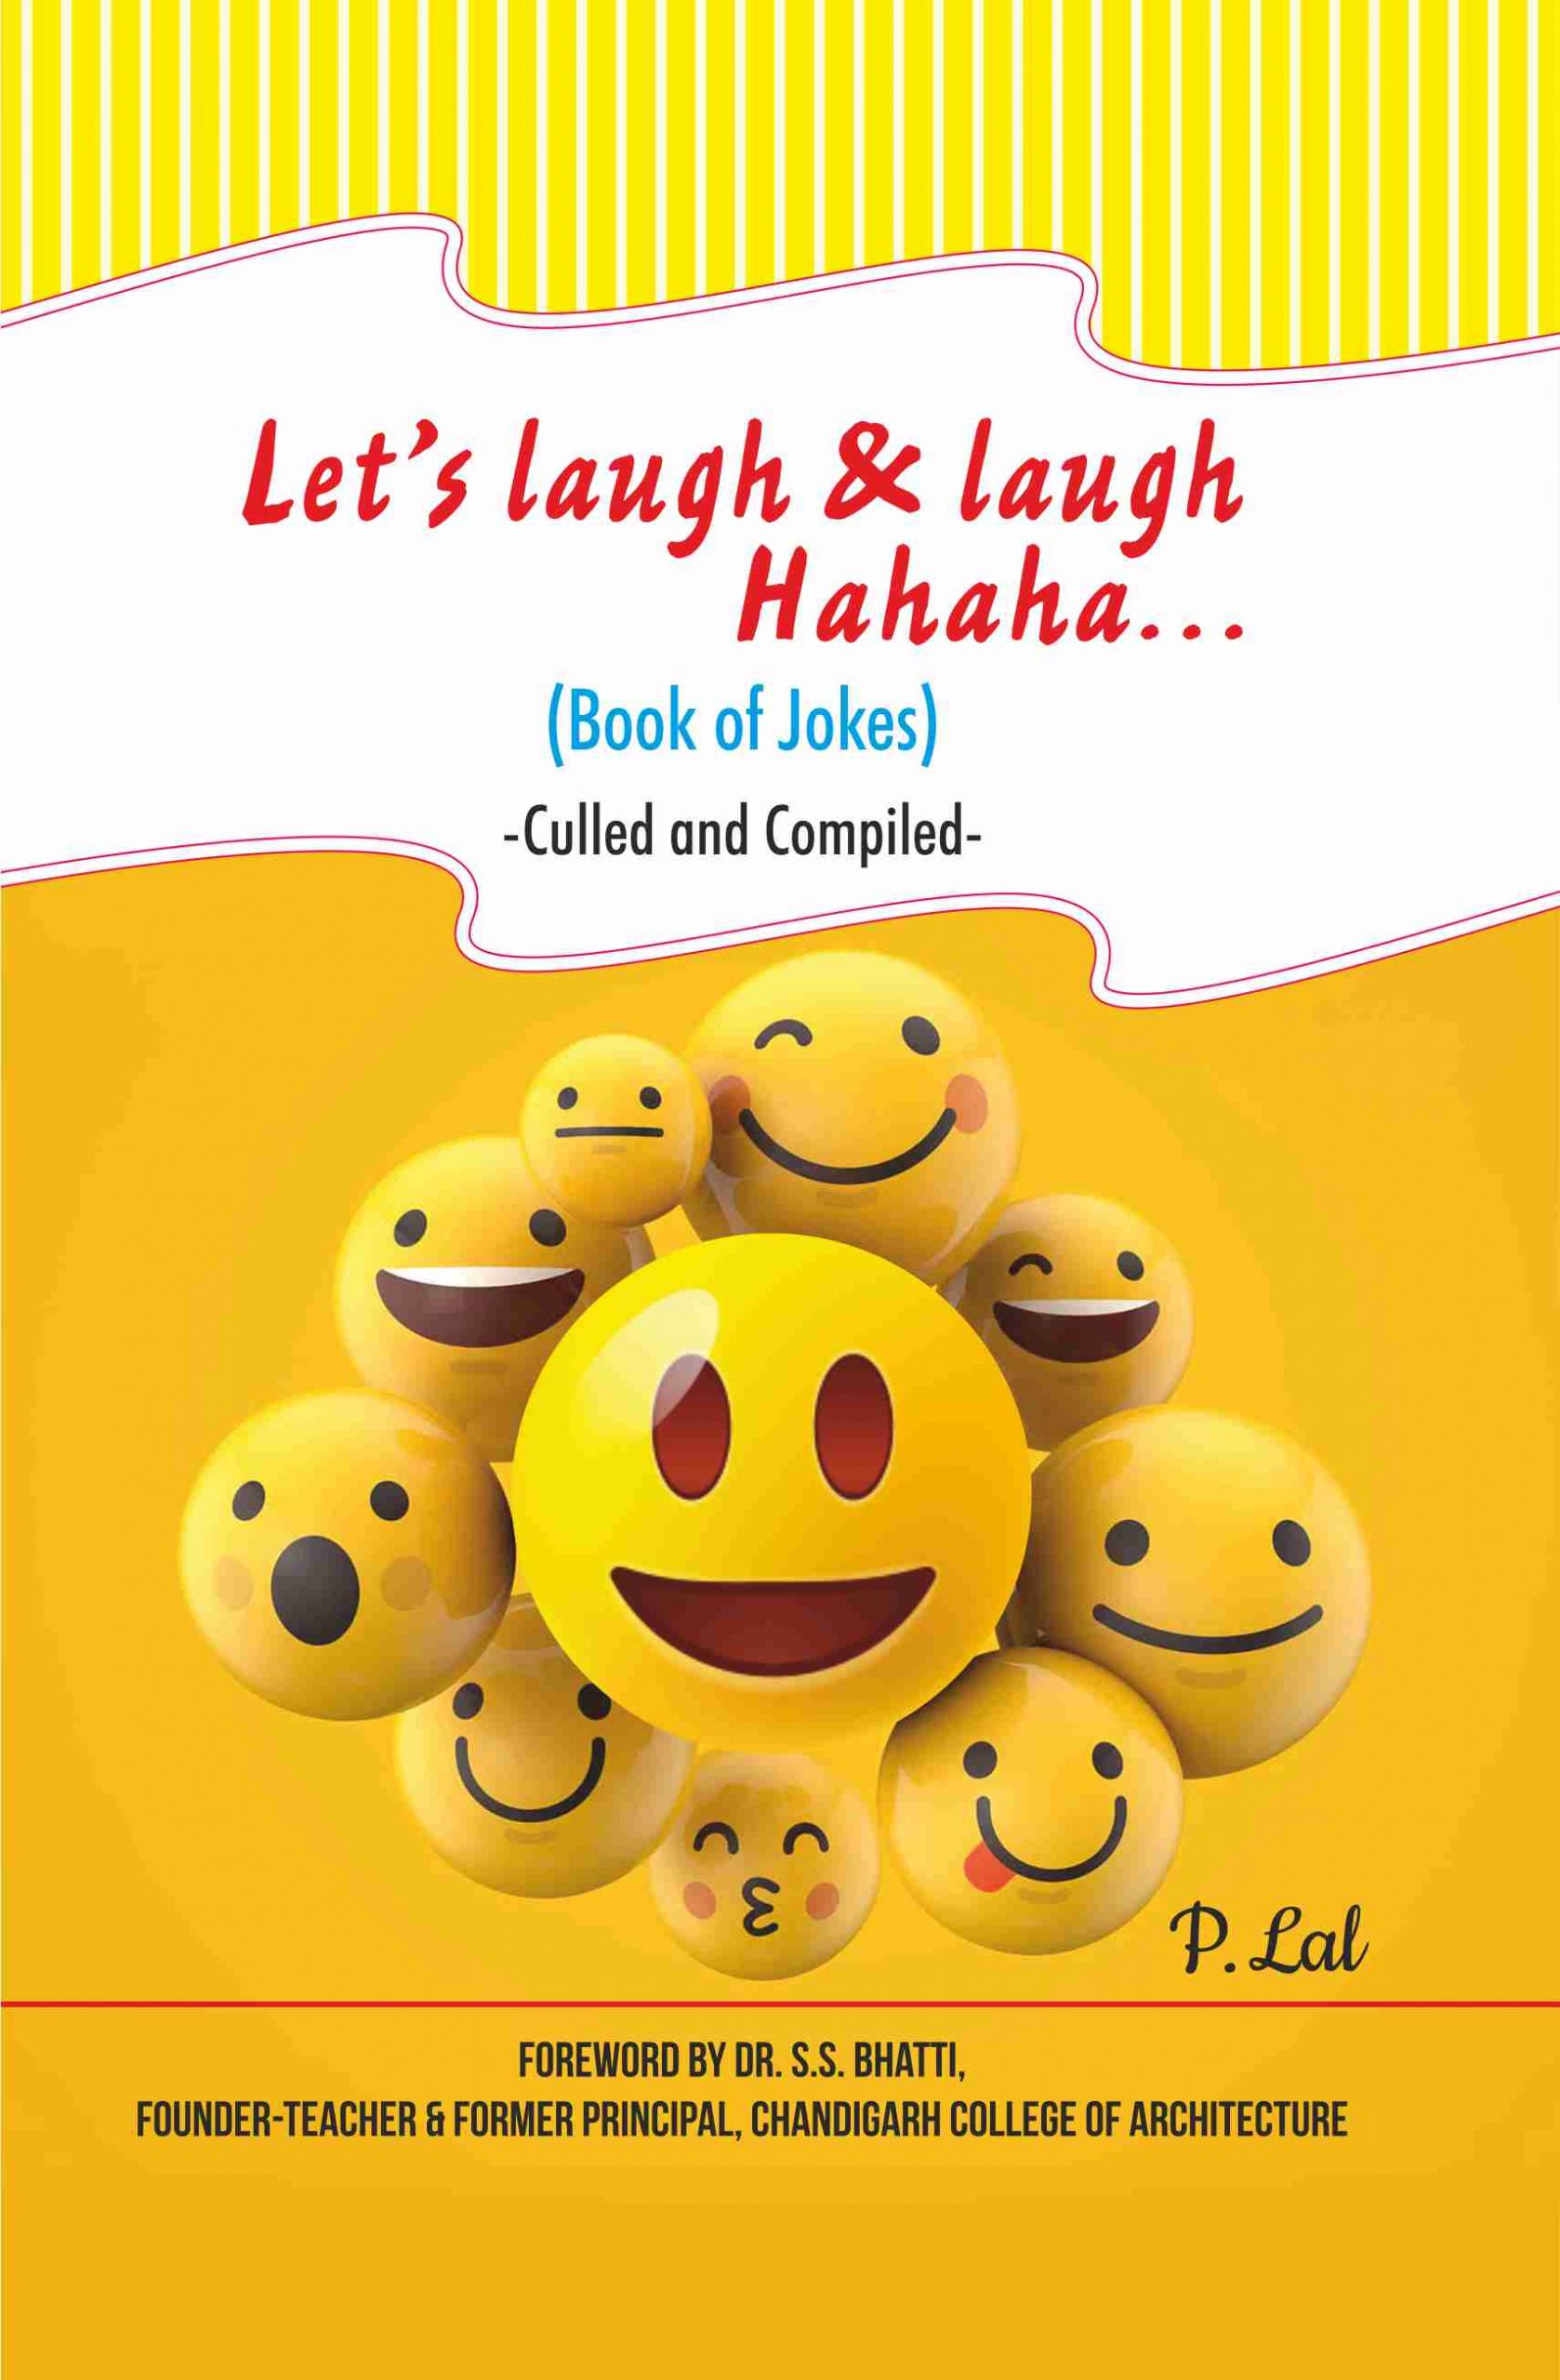 Let’s Laugh & Laugh HaHaHa (Book of jokes) – culled and compiled by P. Lal (Author), Dr. S. S. Bhatti (Foreword)